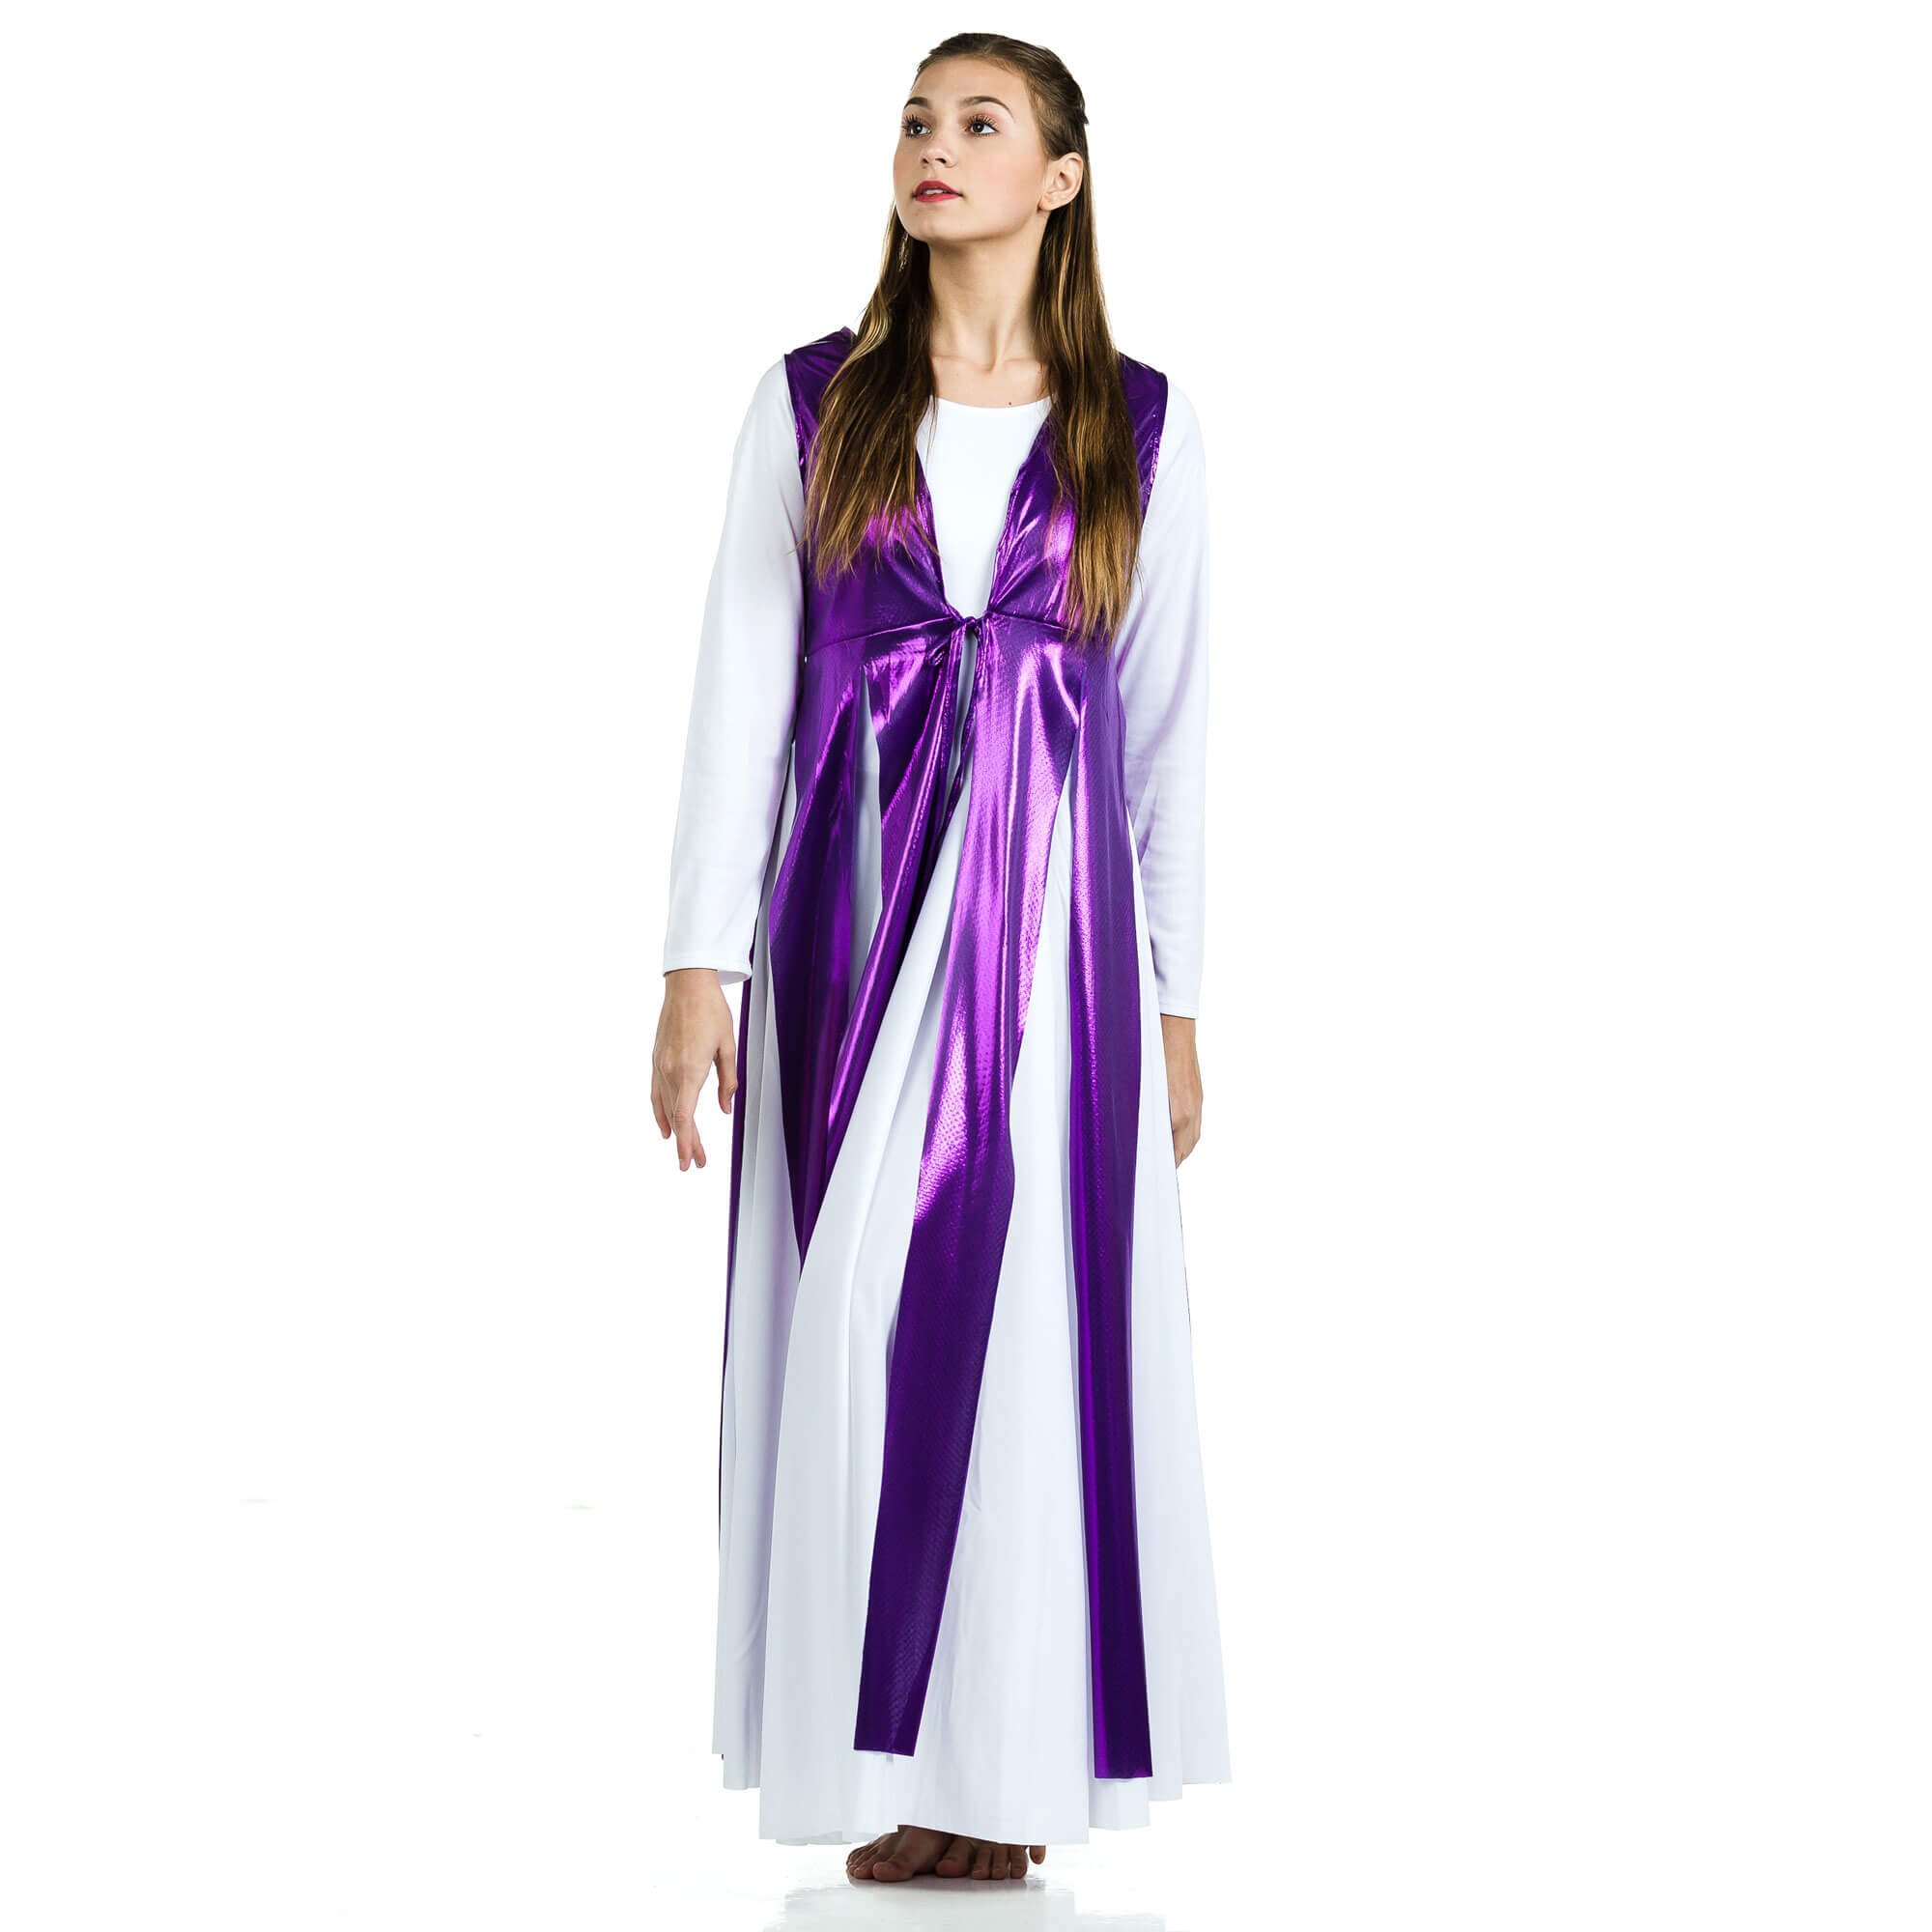 Danzcue Praise Dance Metallic Streamer Tunic (dress not included) - Click Image to Close